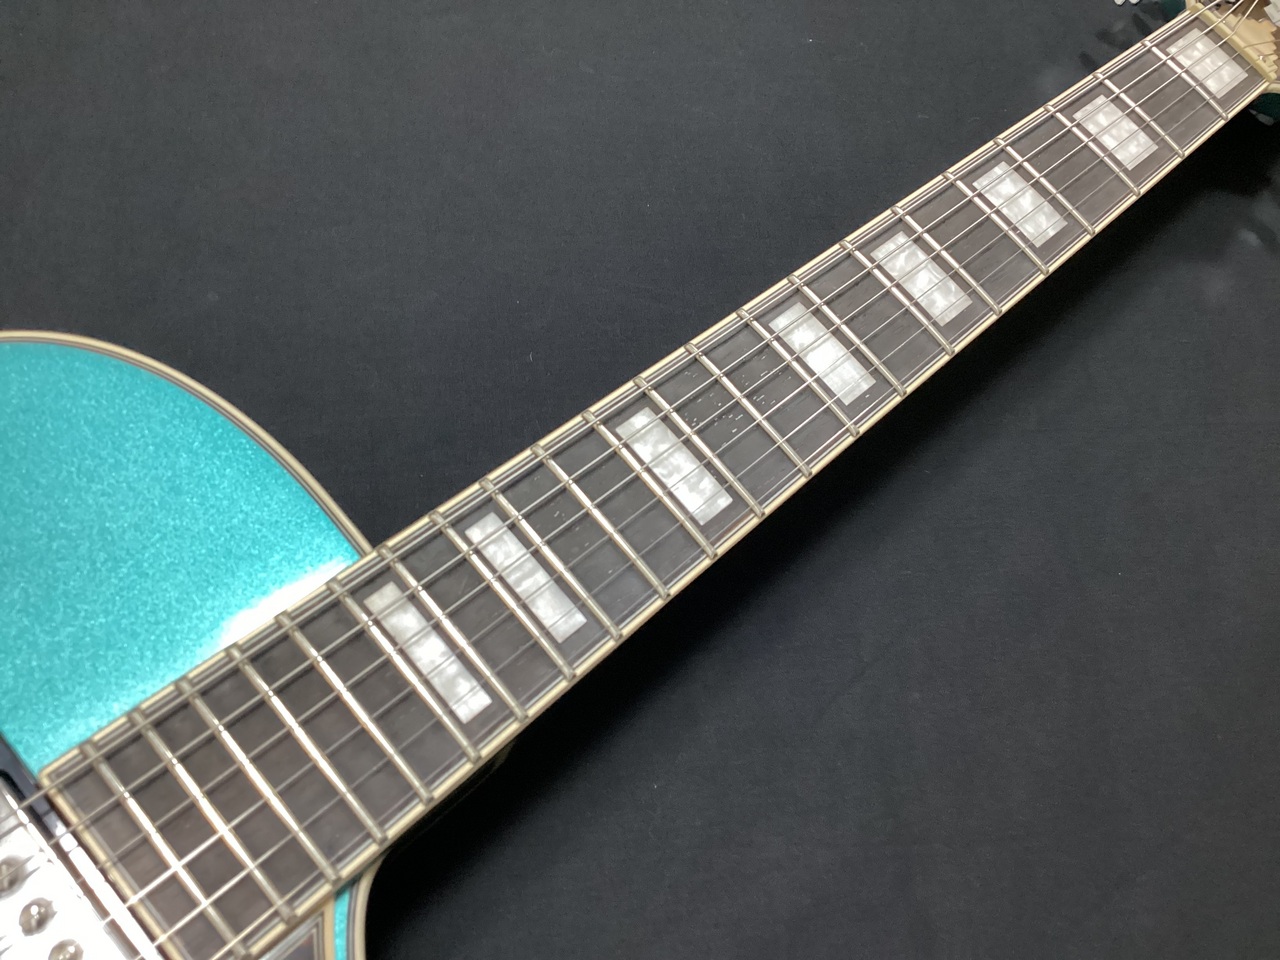 D'Angelico Premier SS Stairstep/Ocean Turquoise(ディアンジェリコ